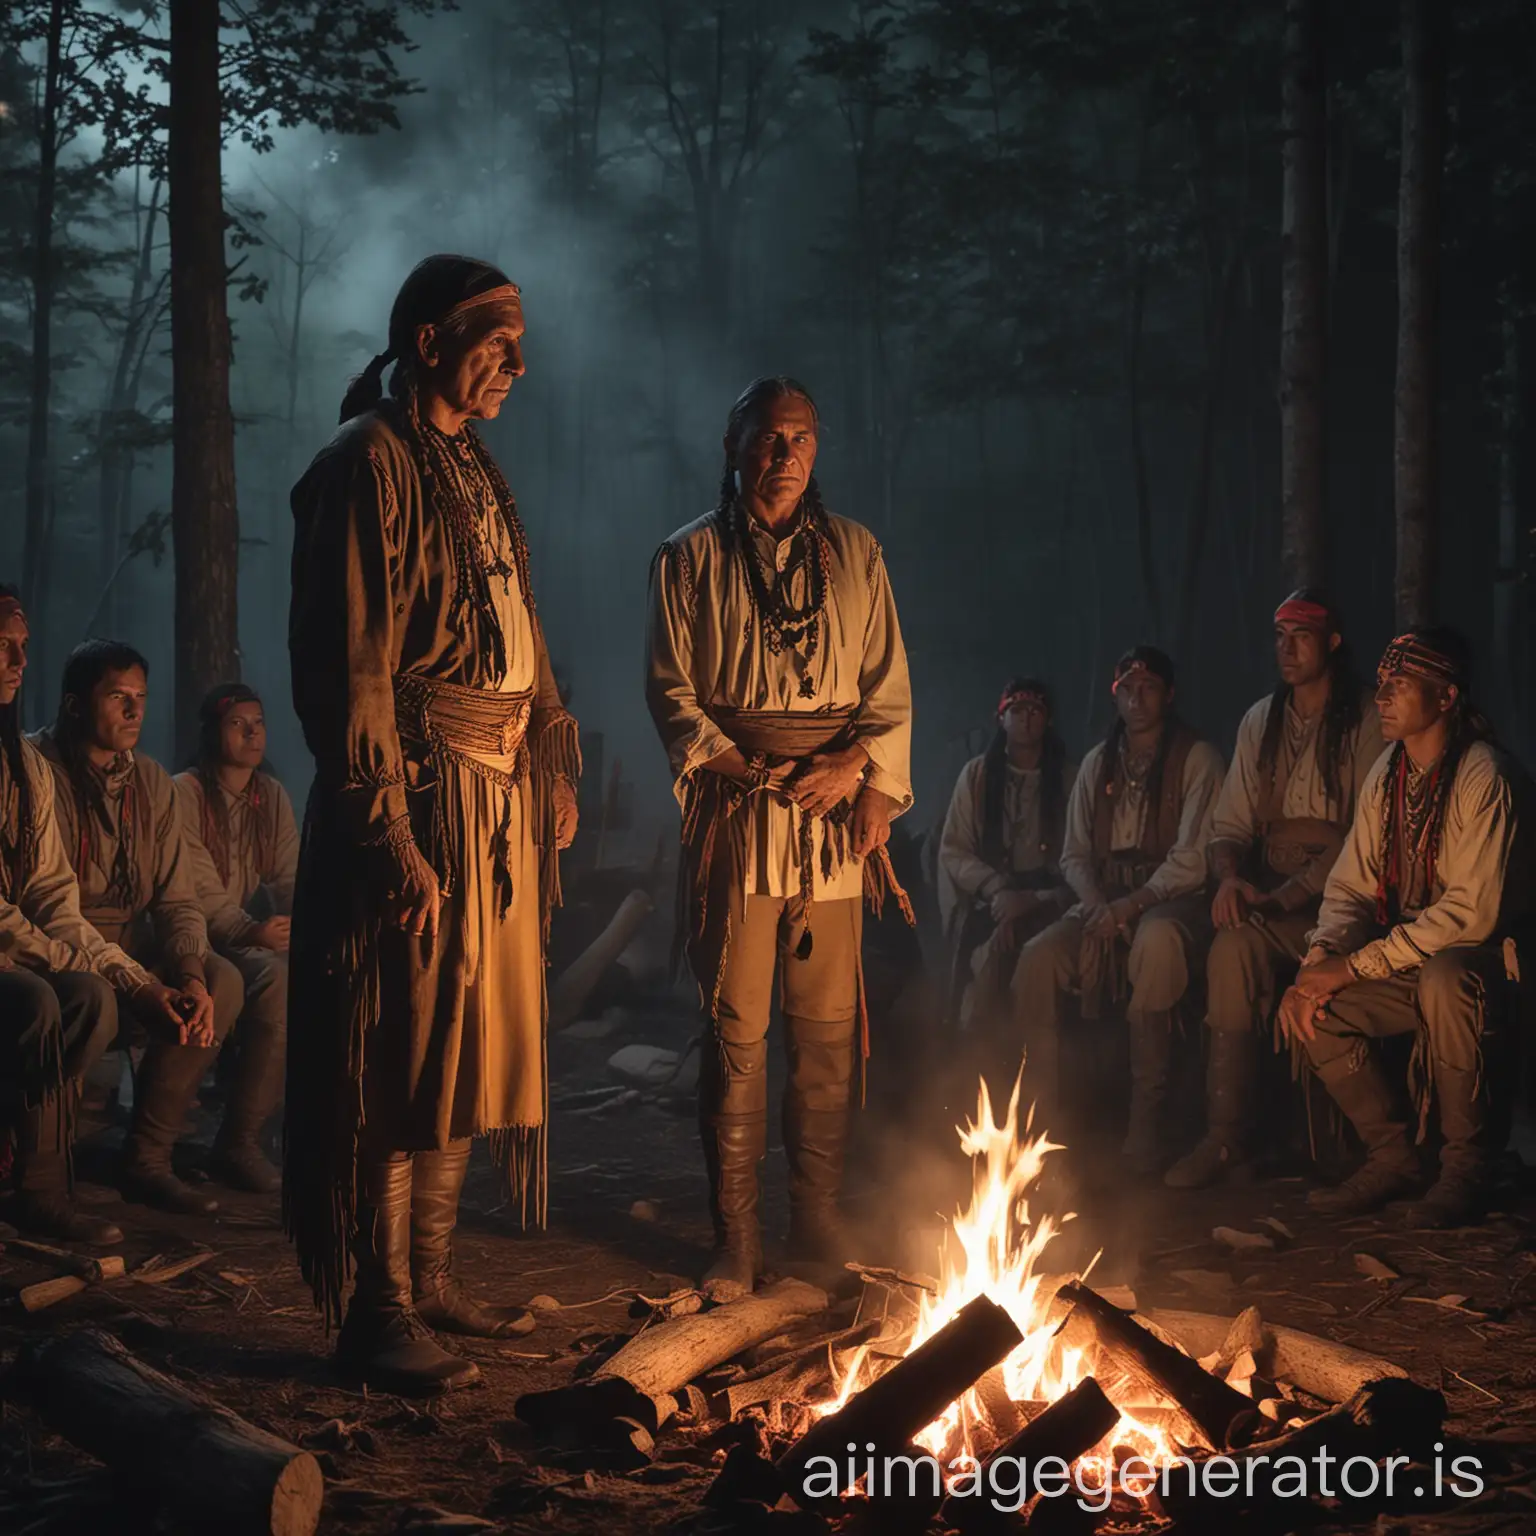 A Native American leader, Tecumseh, placing a curse in the middle of a forest. Tecumseh is dressed in traditional attire, standing solemnly in front of a campfire. Tribal members are quietly observing in the background. The night is dark, and the firelight creates an eerie atmosphere.